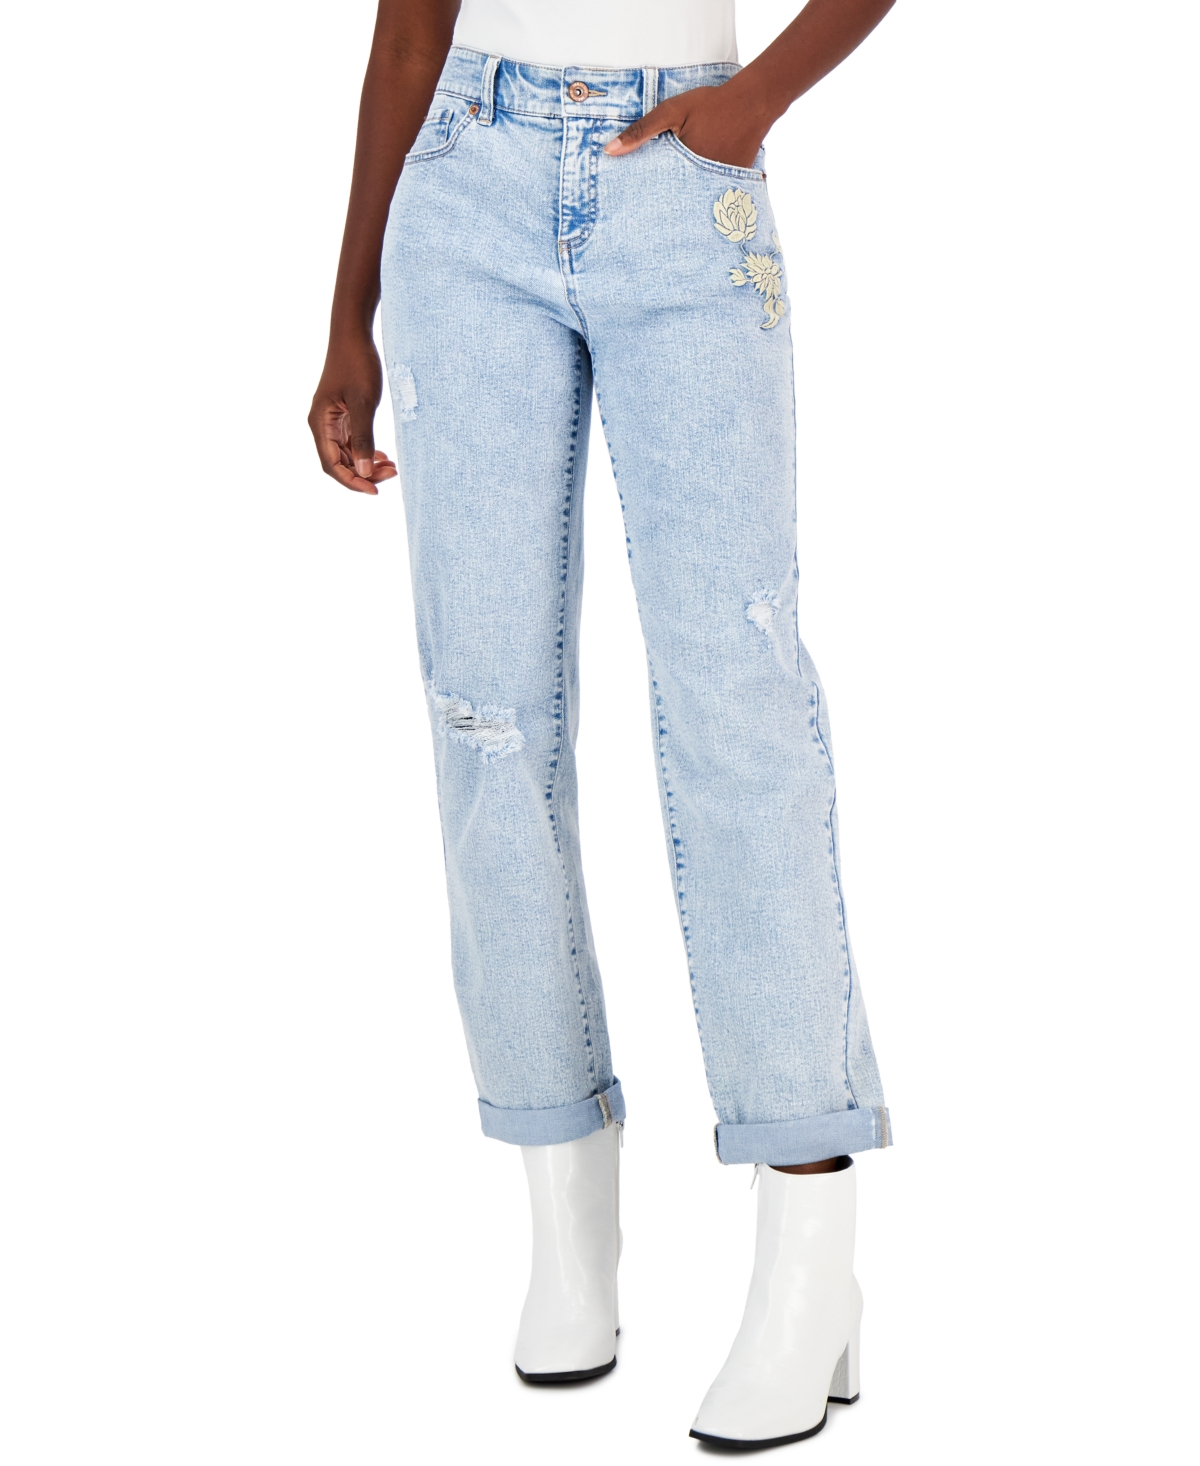  Inc International Concepts Women's Mid-Rise Embroidered Boyfriend Jeans, Created for Macy's